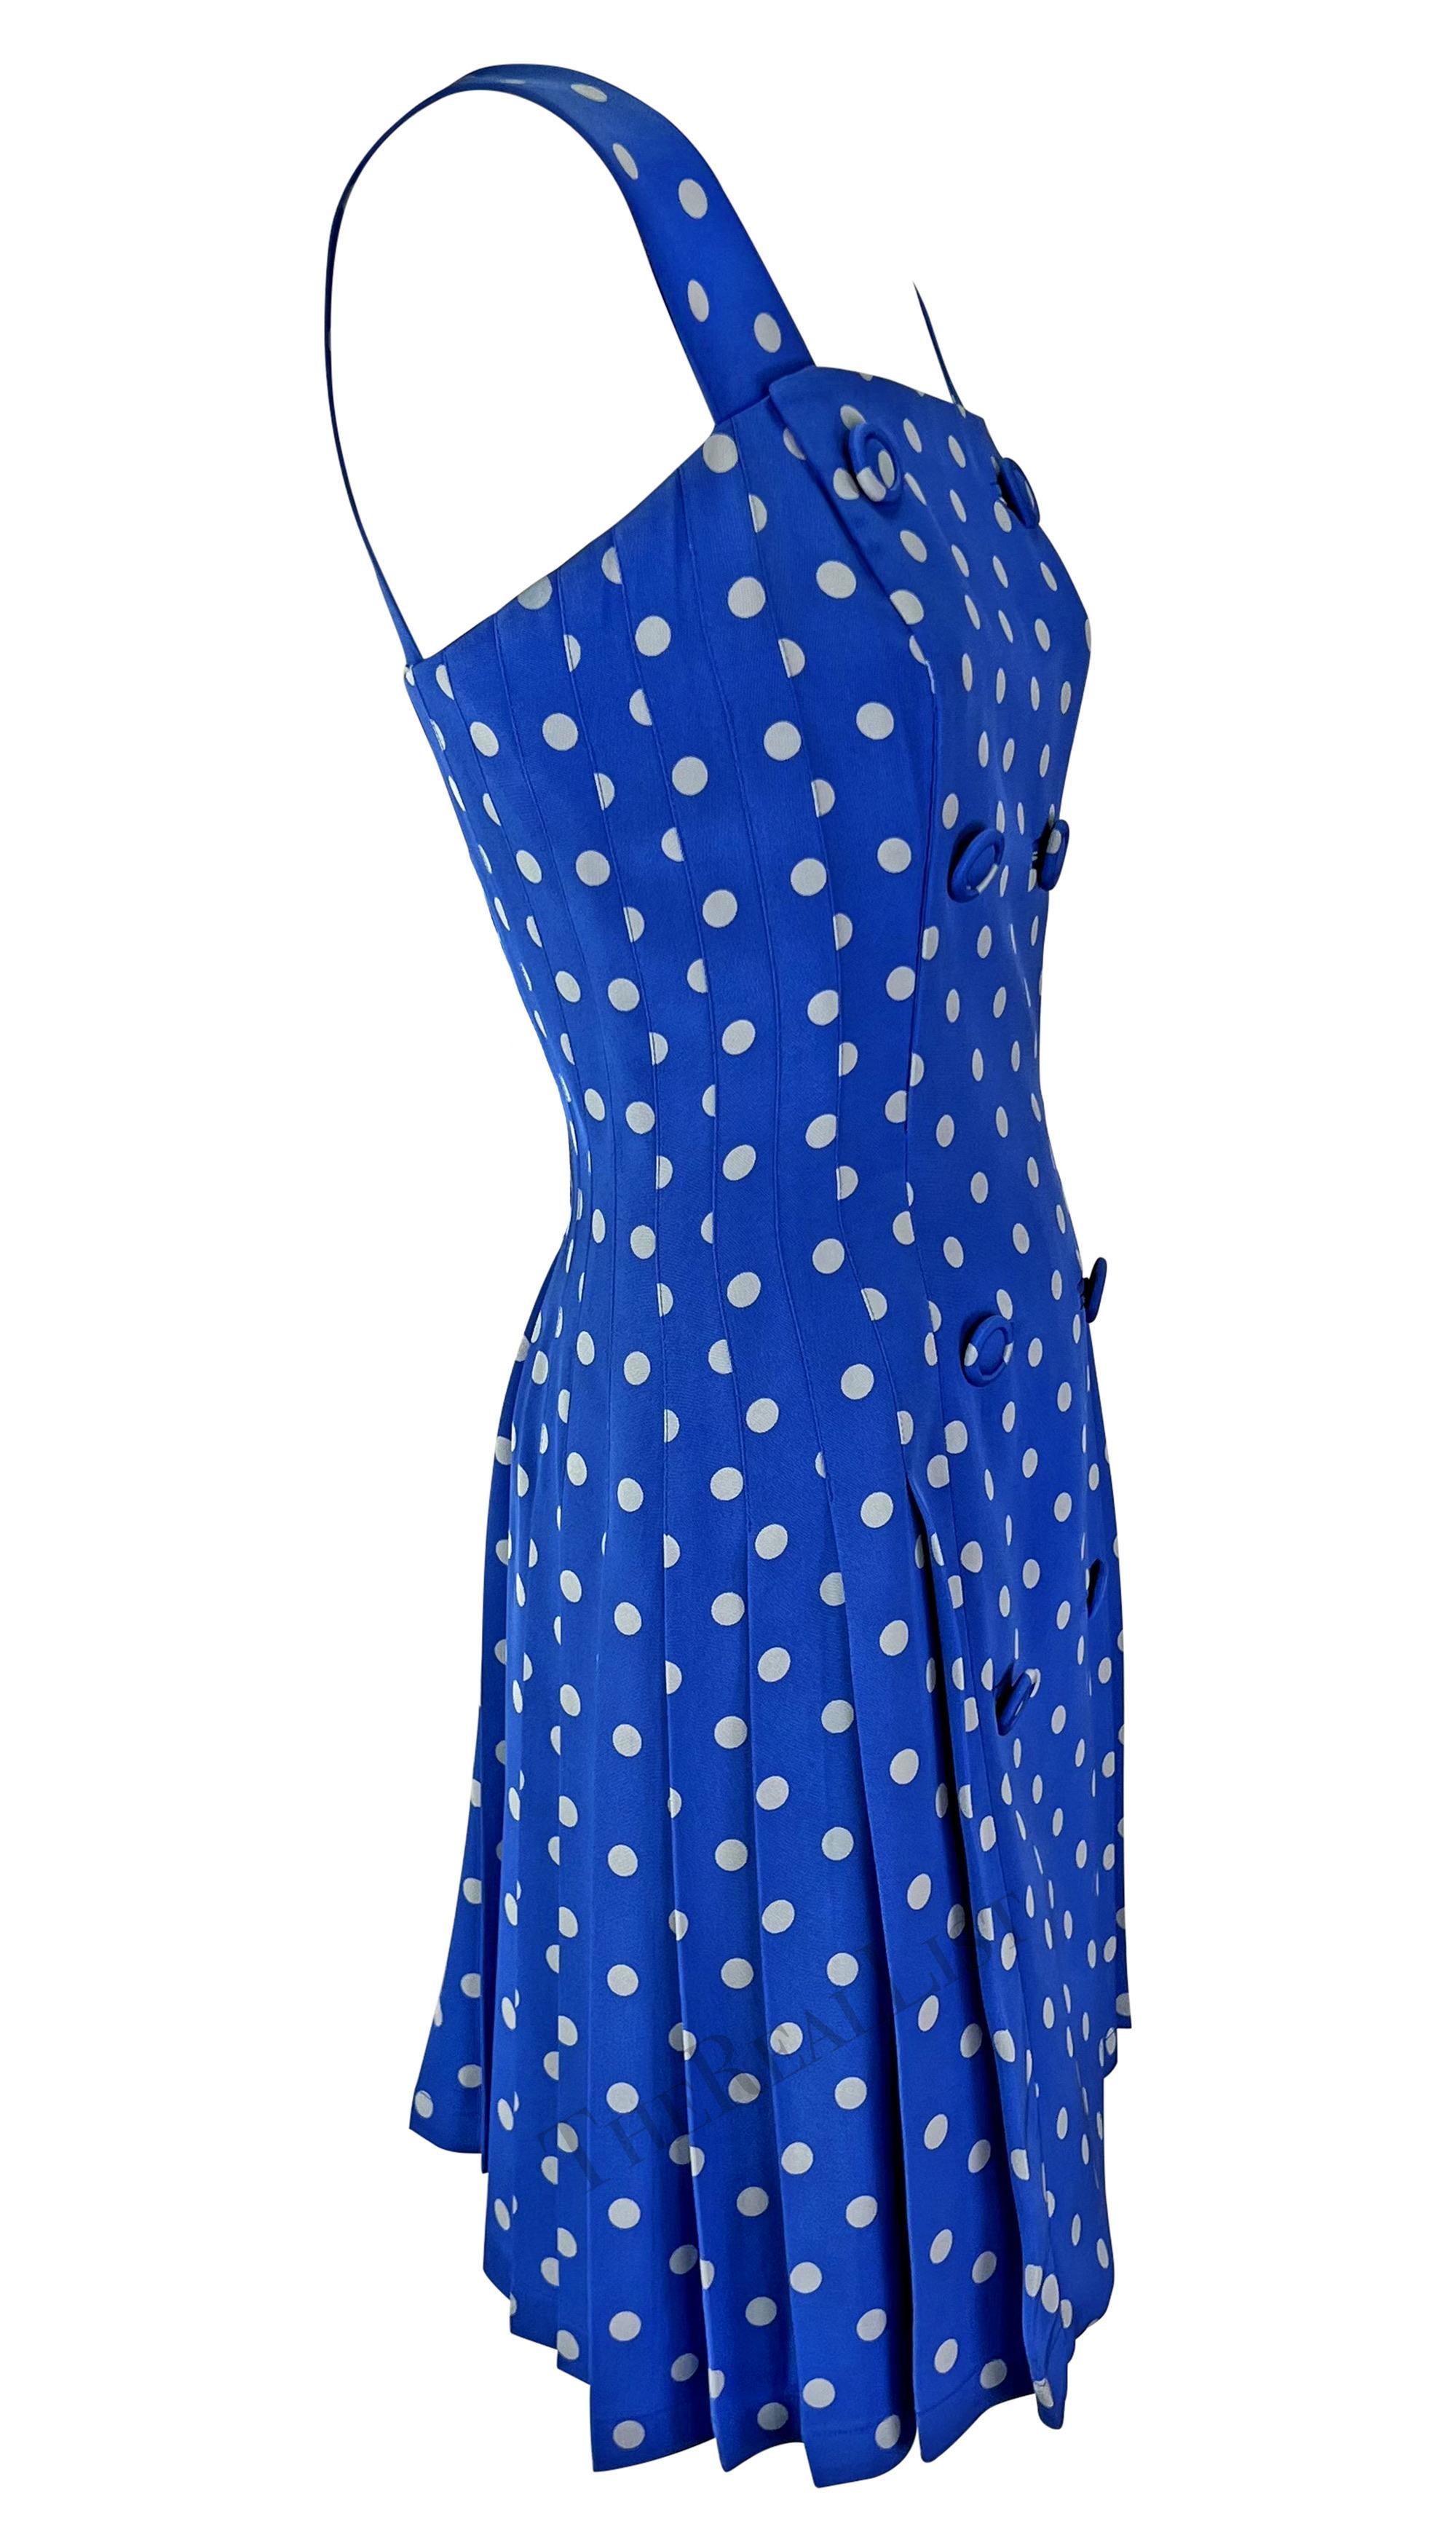 S/S 1994 Gianni Versace Runway Blue Polka Dot Pleated Double Breasted Dress For Sale 2